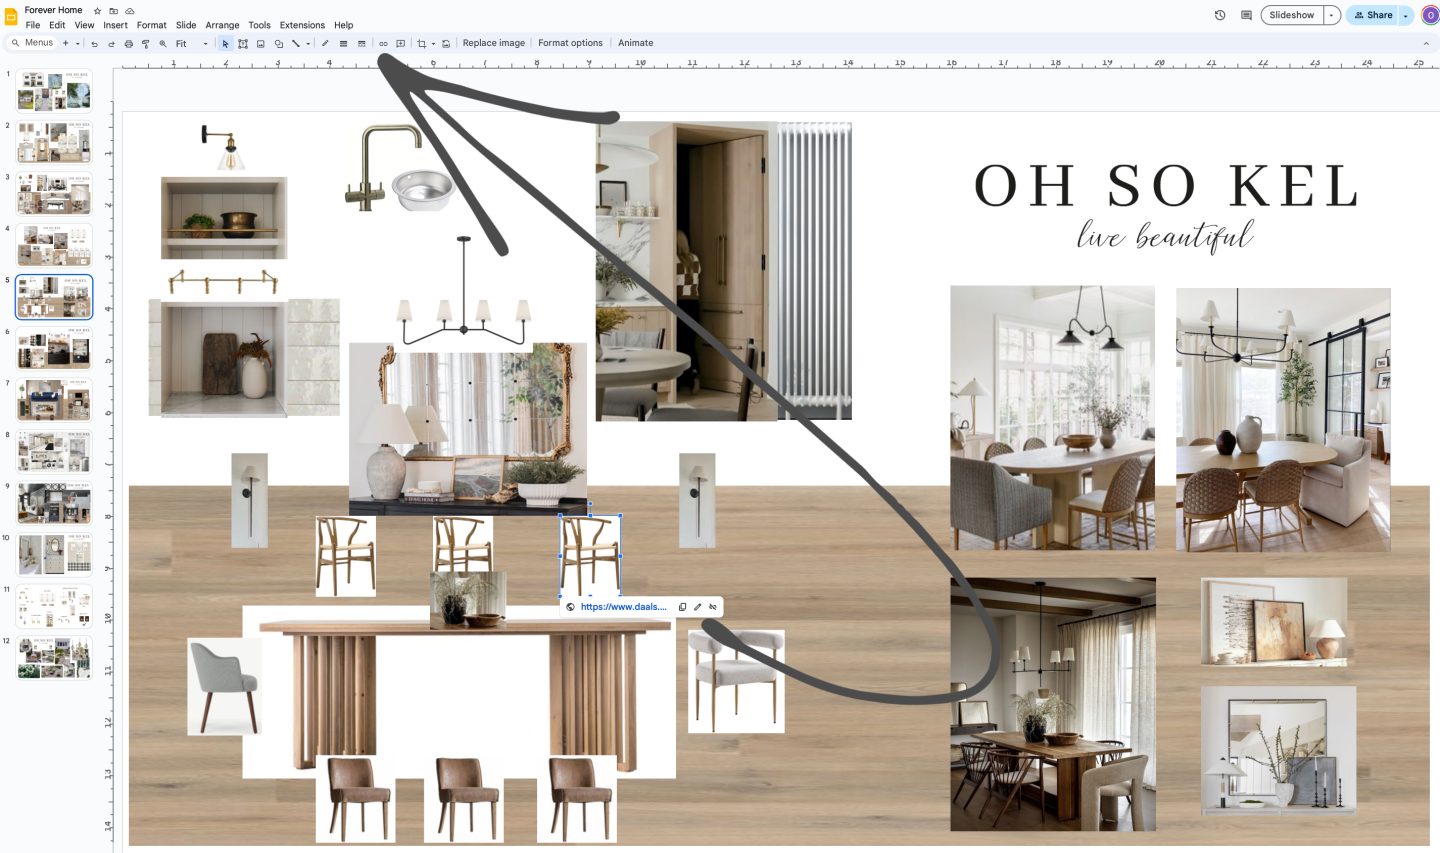 How to create an interior design moodboard